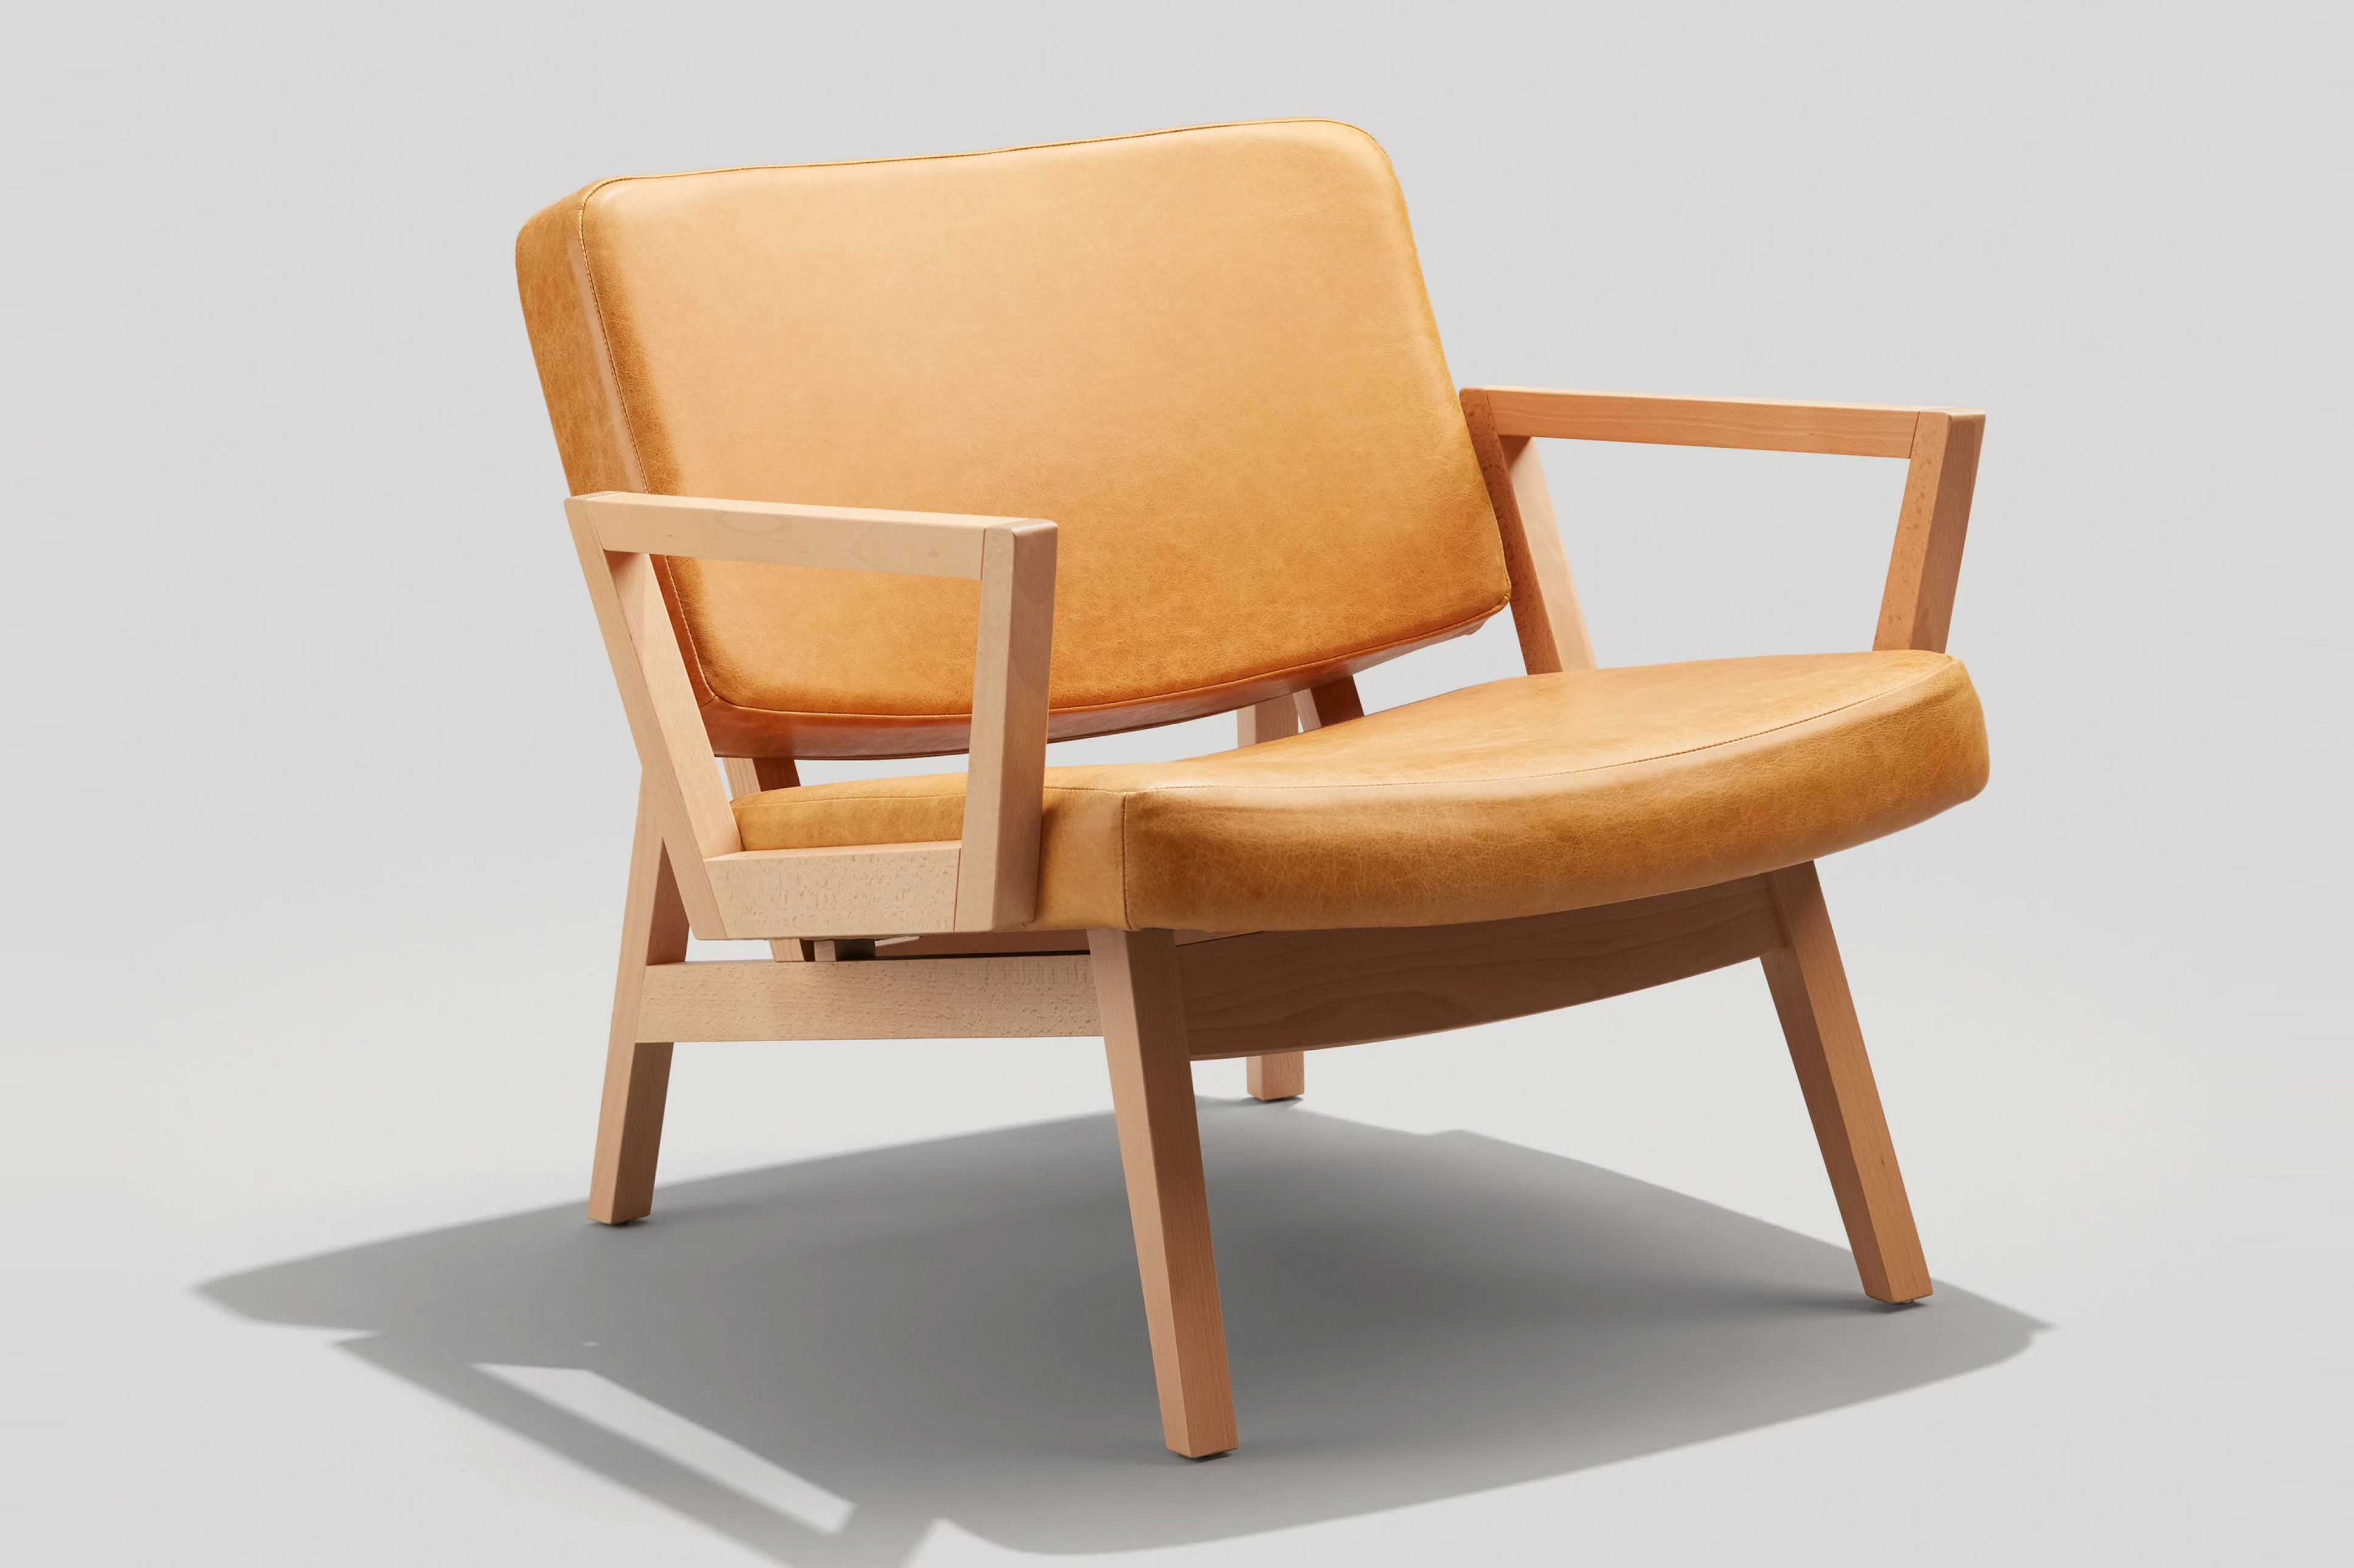 4 Reasons to Love This Modern Lounge Chair